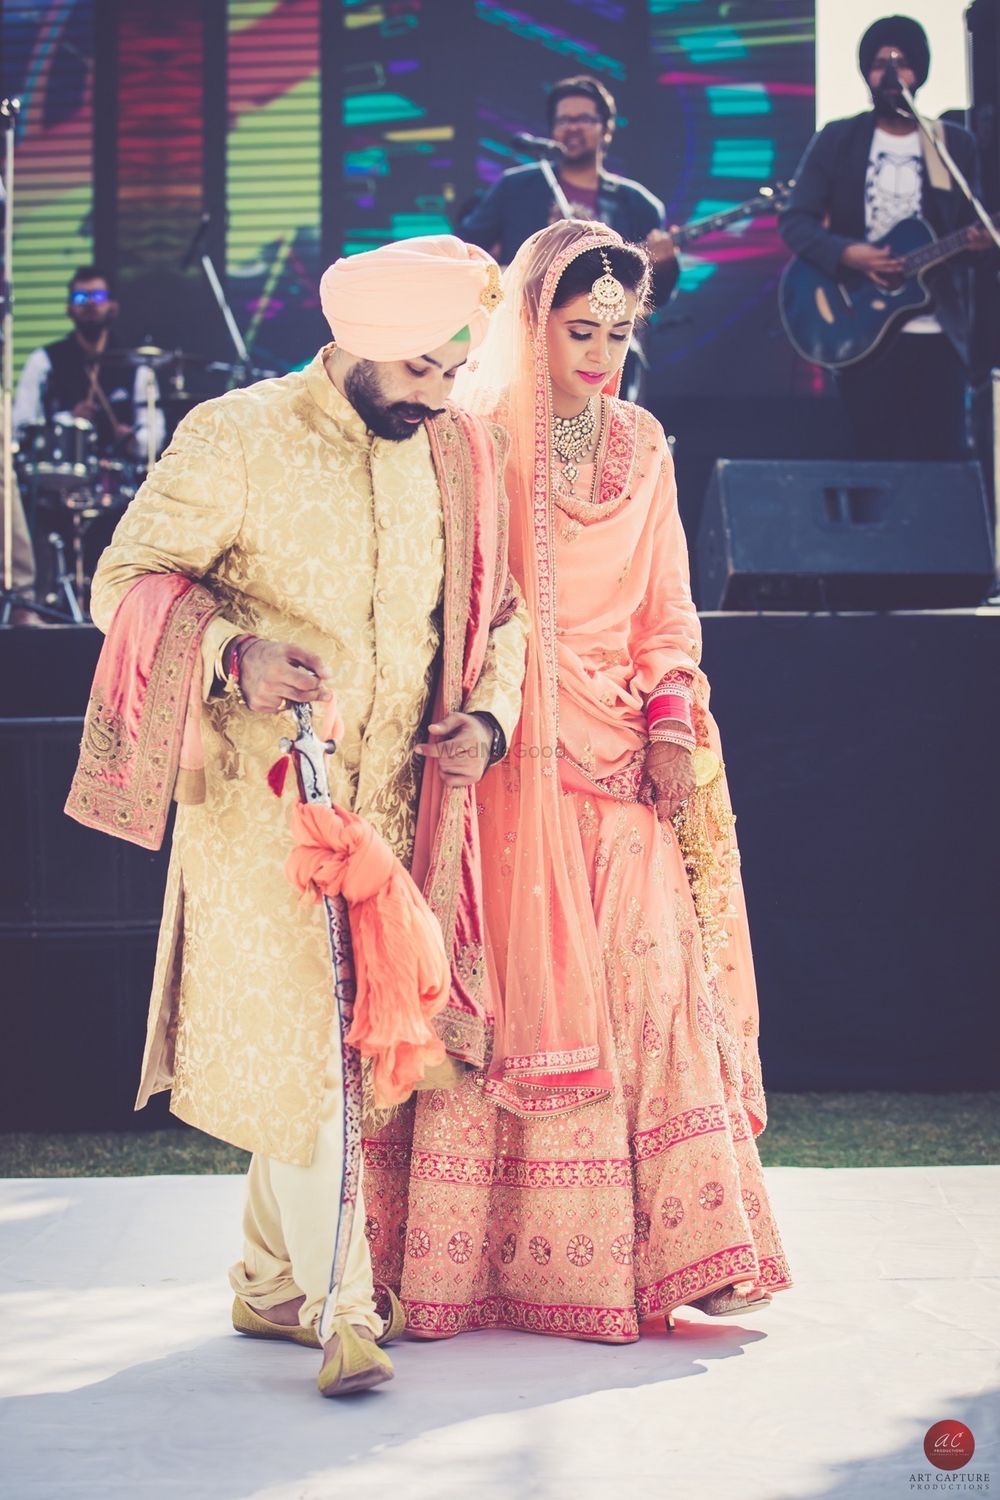 Photo of Coordinated bride and groom in peach wedding outfit and turban